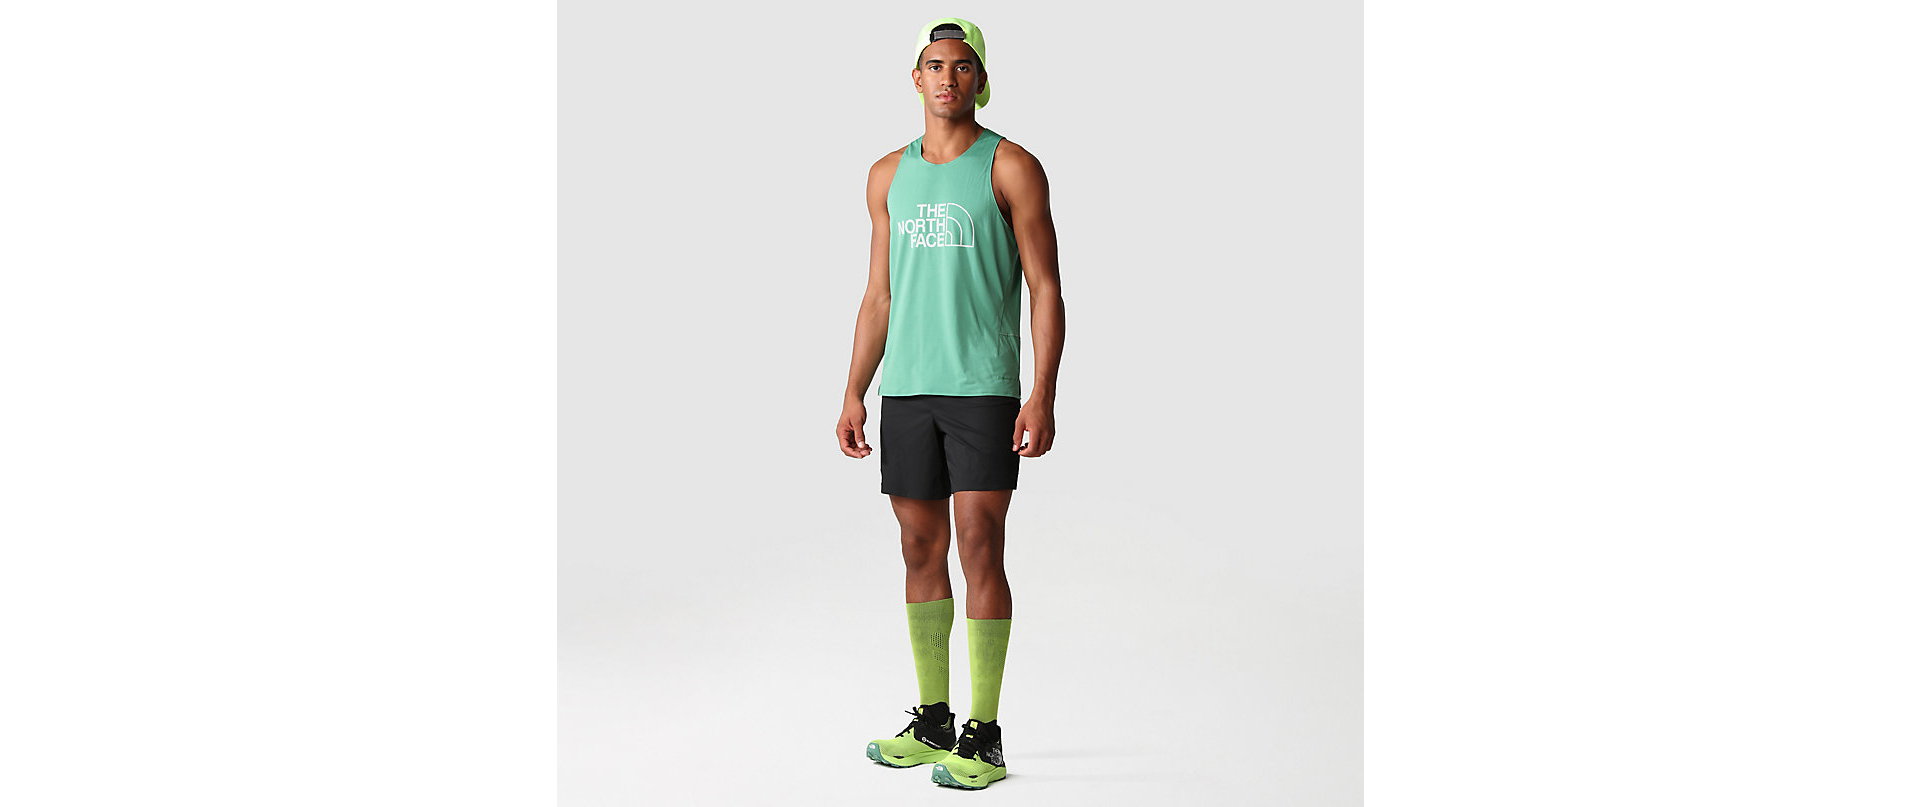 THE NORTH FACE PACESETTER RUN SHORT HOMBRE